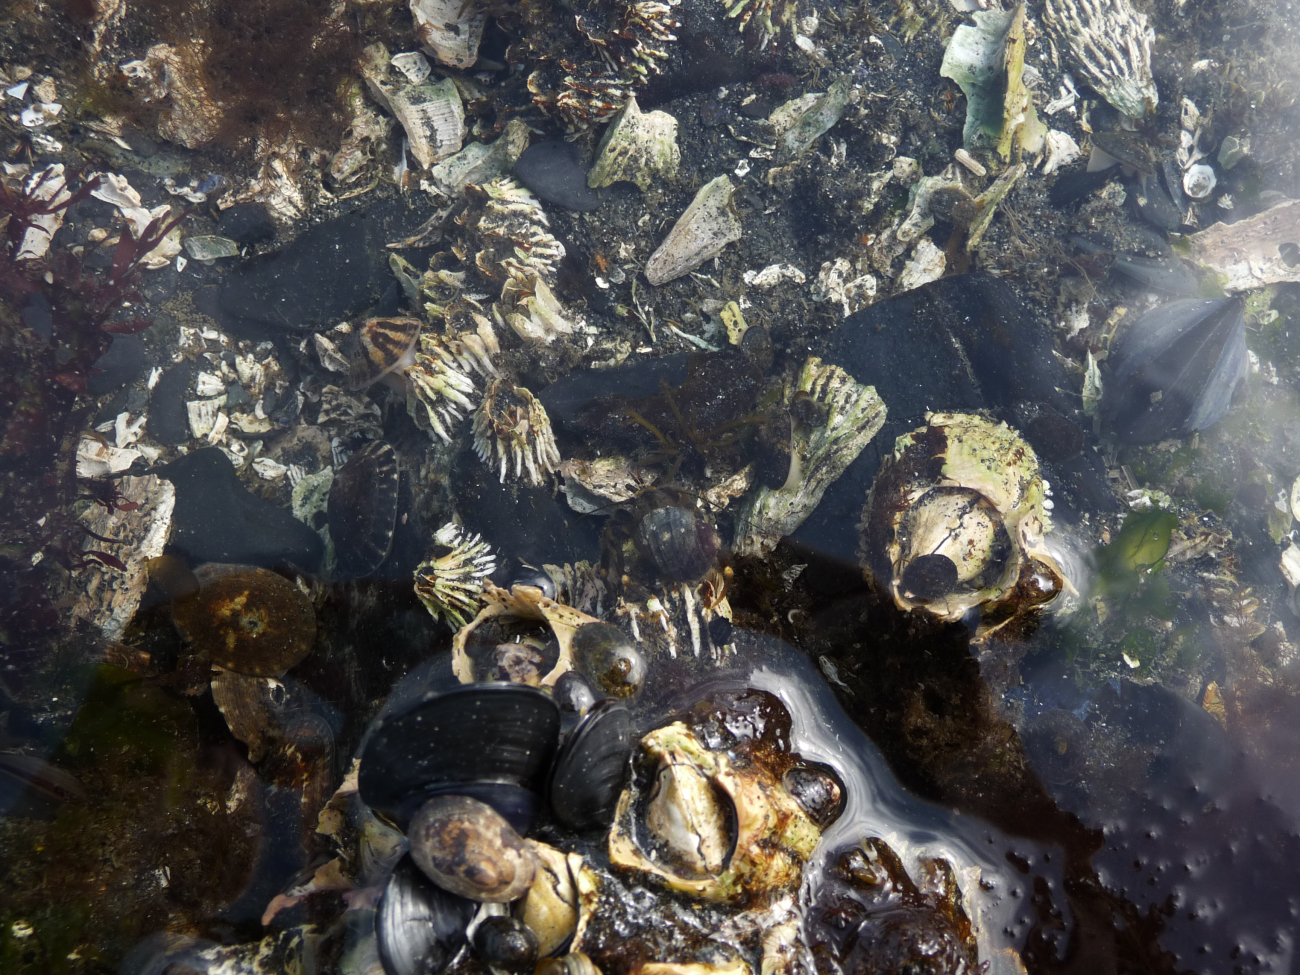 Various types of algae, limpets, at least one gastropod right in the center ofthe image, mussels and barnacles are found in this tide pool